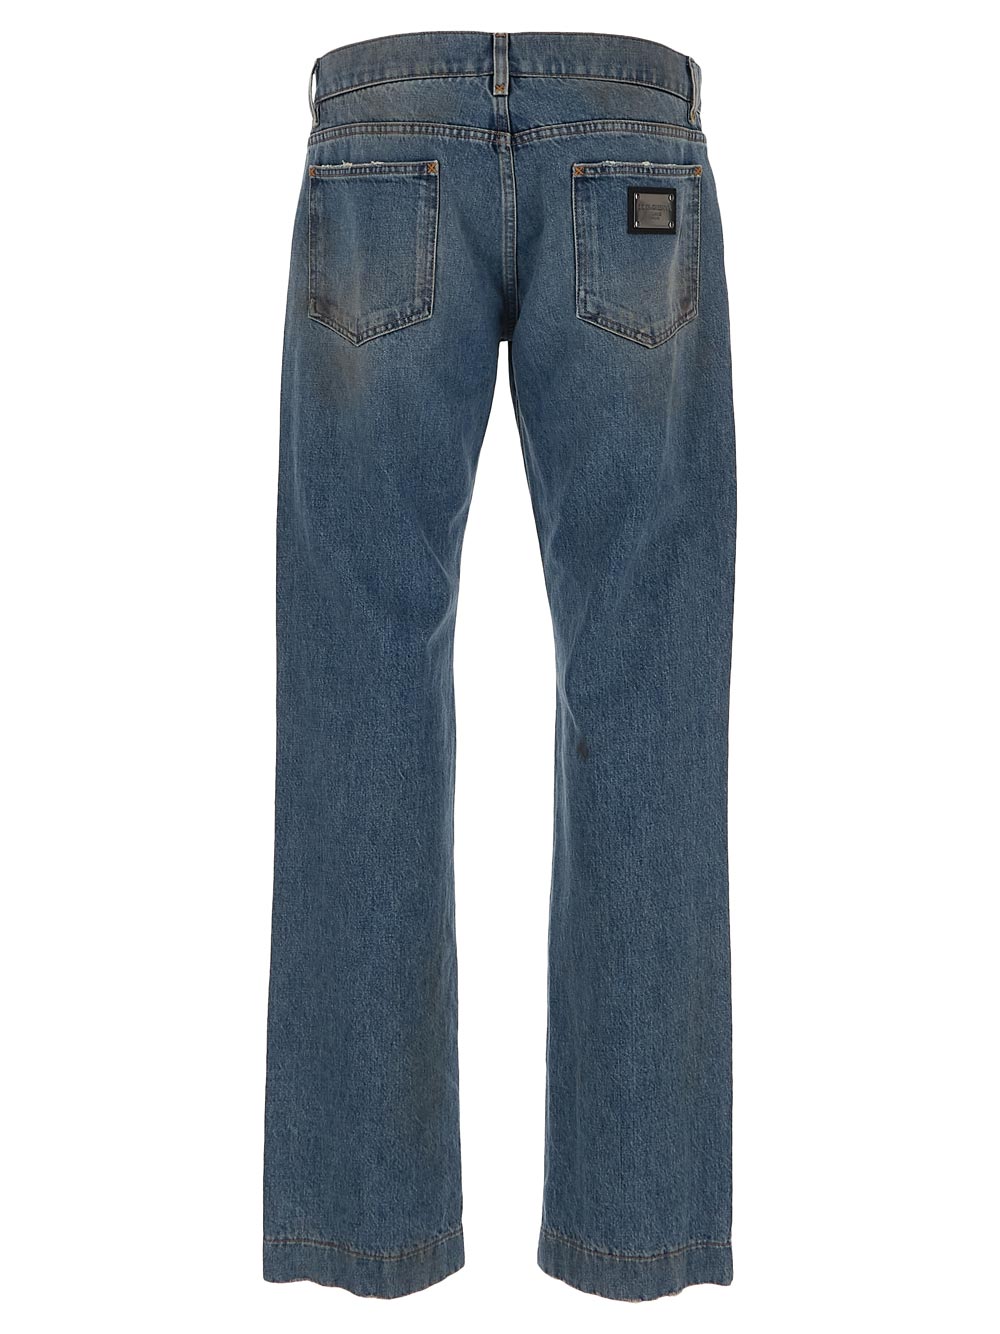 Dolce & Gabbana Washed Denim Jeans With Rips